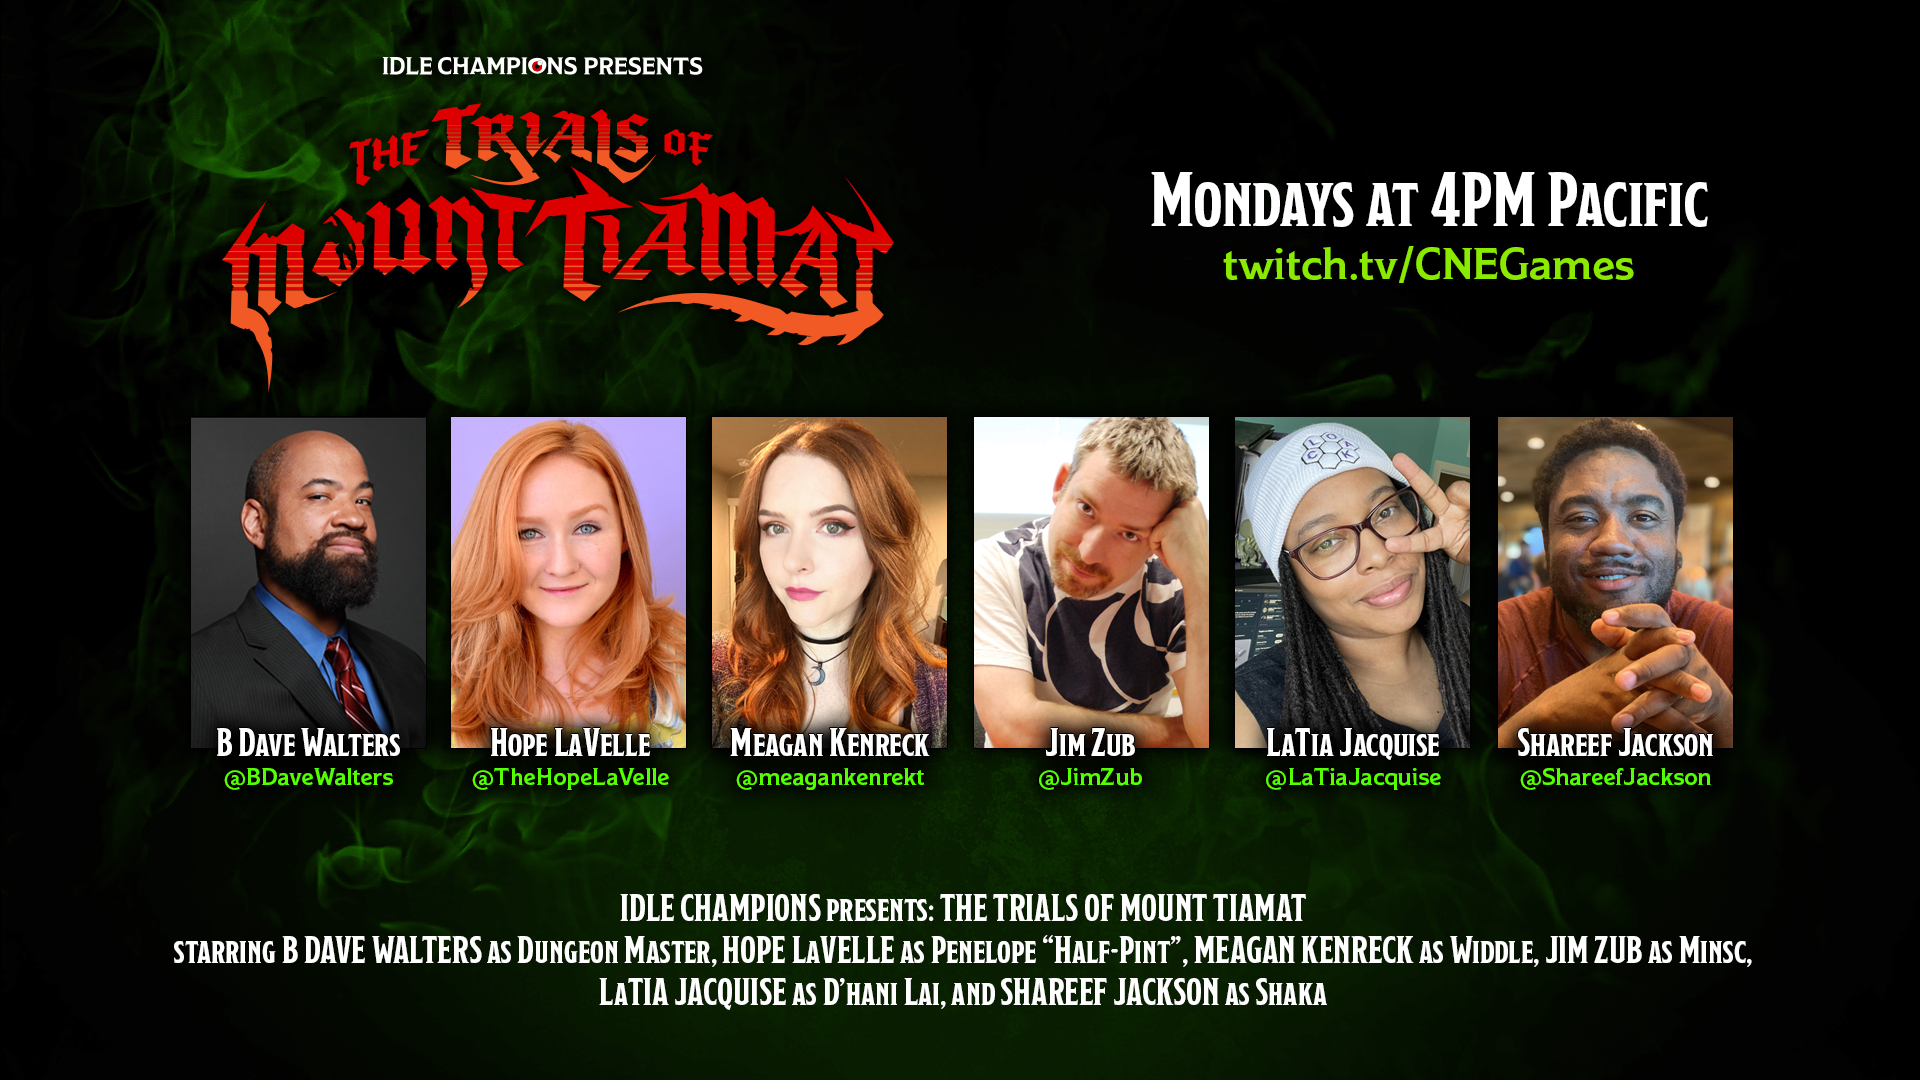 Idle Champions Presents: Trials of Mount Tiamat B Dave Walters Hope LaVelle Meagan Kenreck Jim Zub LaTia Jacquise Shareef Jackson